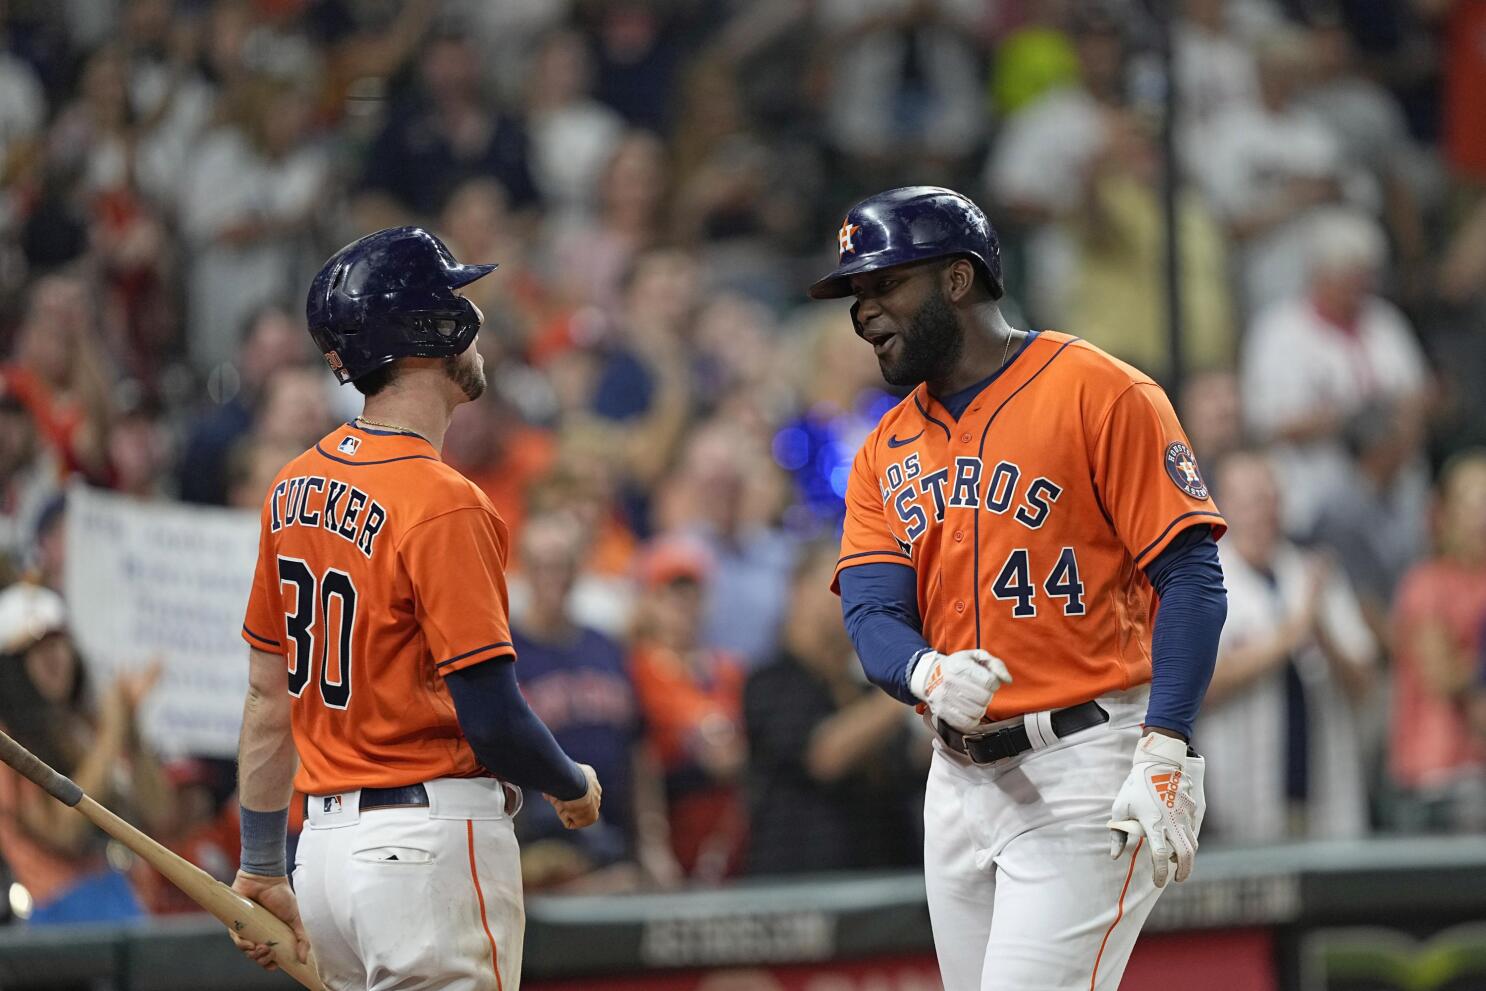 Rockies fall to Astros again, drop 10th consecutive road game